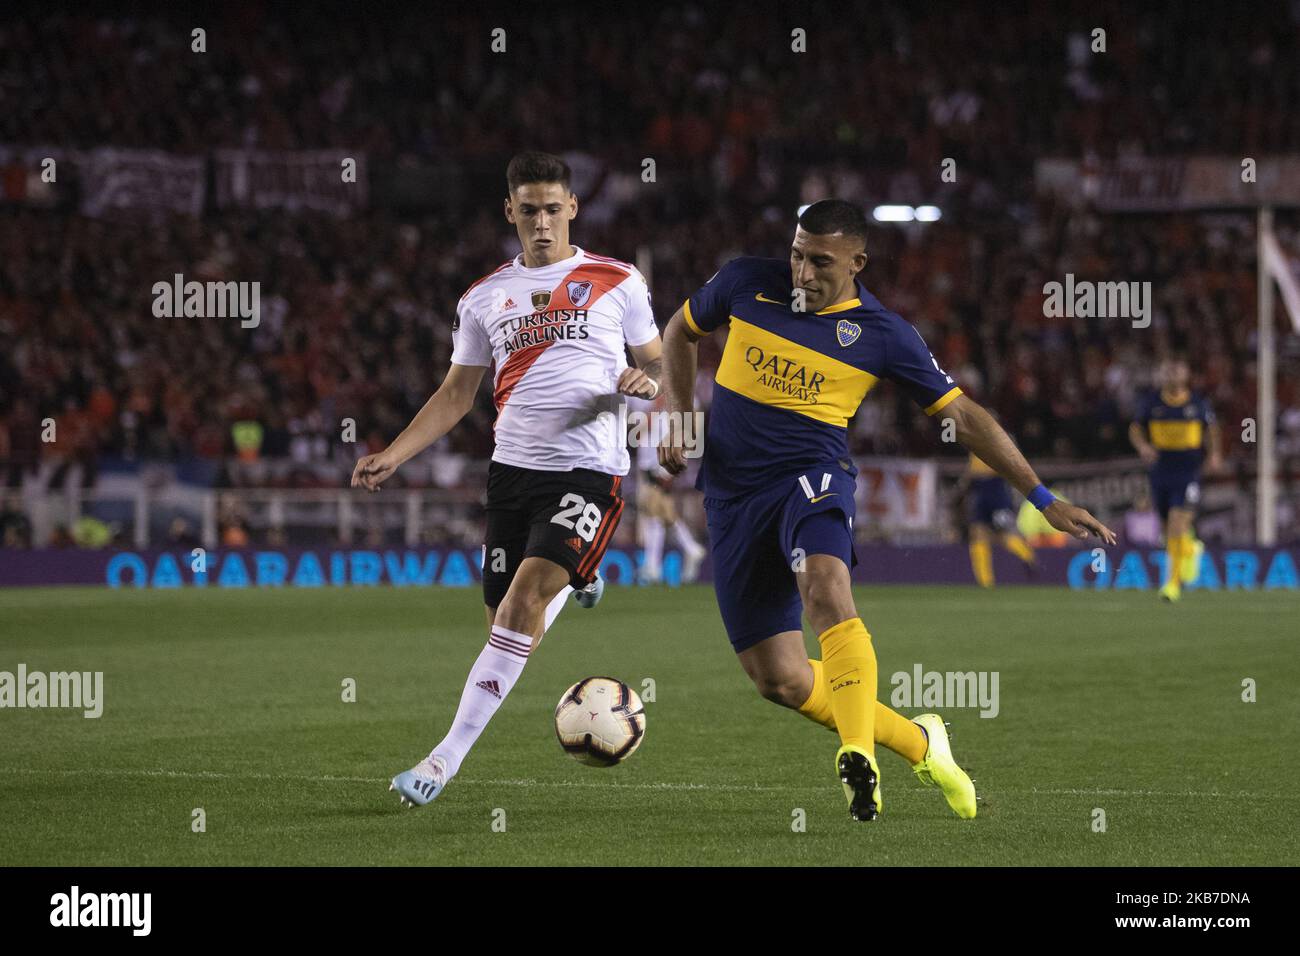 Wanchope Avila of Boca Juniors in action during the first leg match between River Plate and Boca Juniors as part of the semi-final of Copa CONMEBOL Libertadores 2019 at the Estadio Monumental Antonio Vespucio Liberti on October 1, 2019 in Buenos Aires, Argentina. (Photo by Matias Baglietto/NurPhoto) Stock Photo